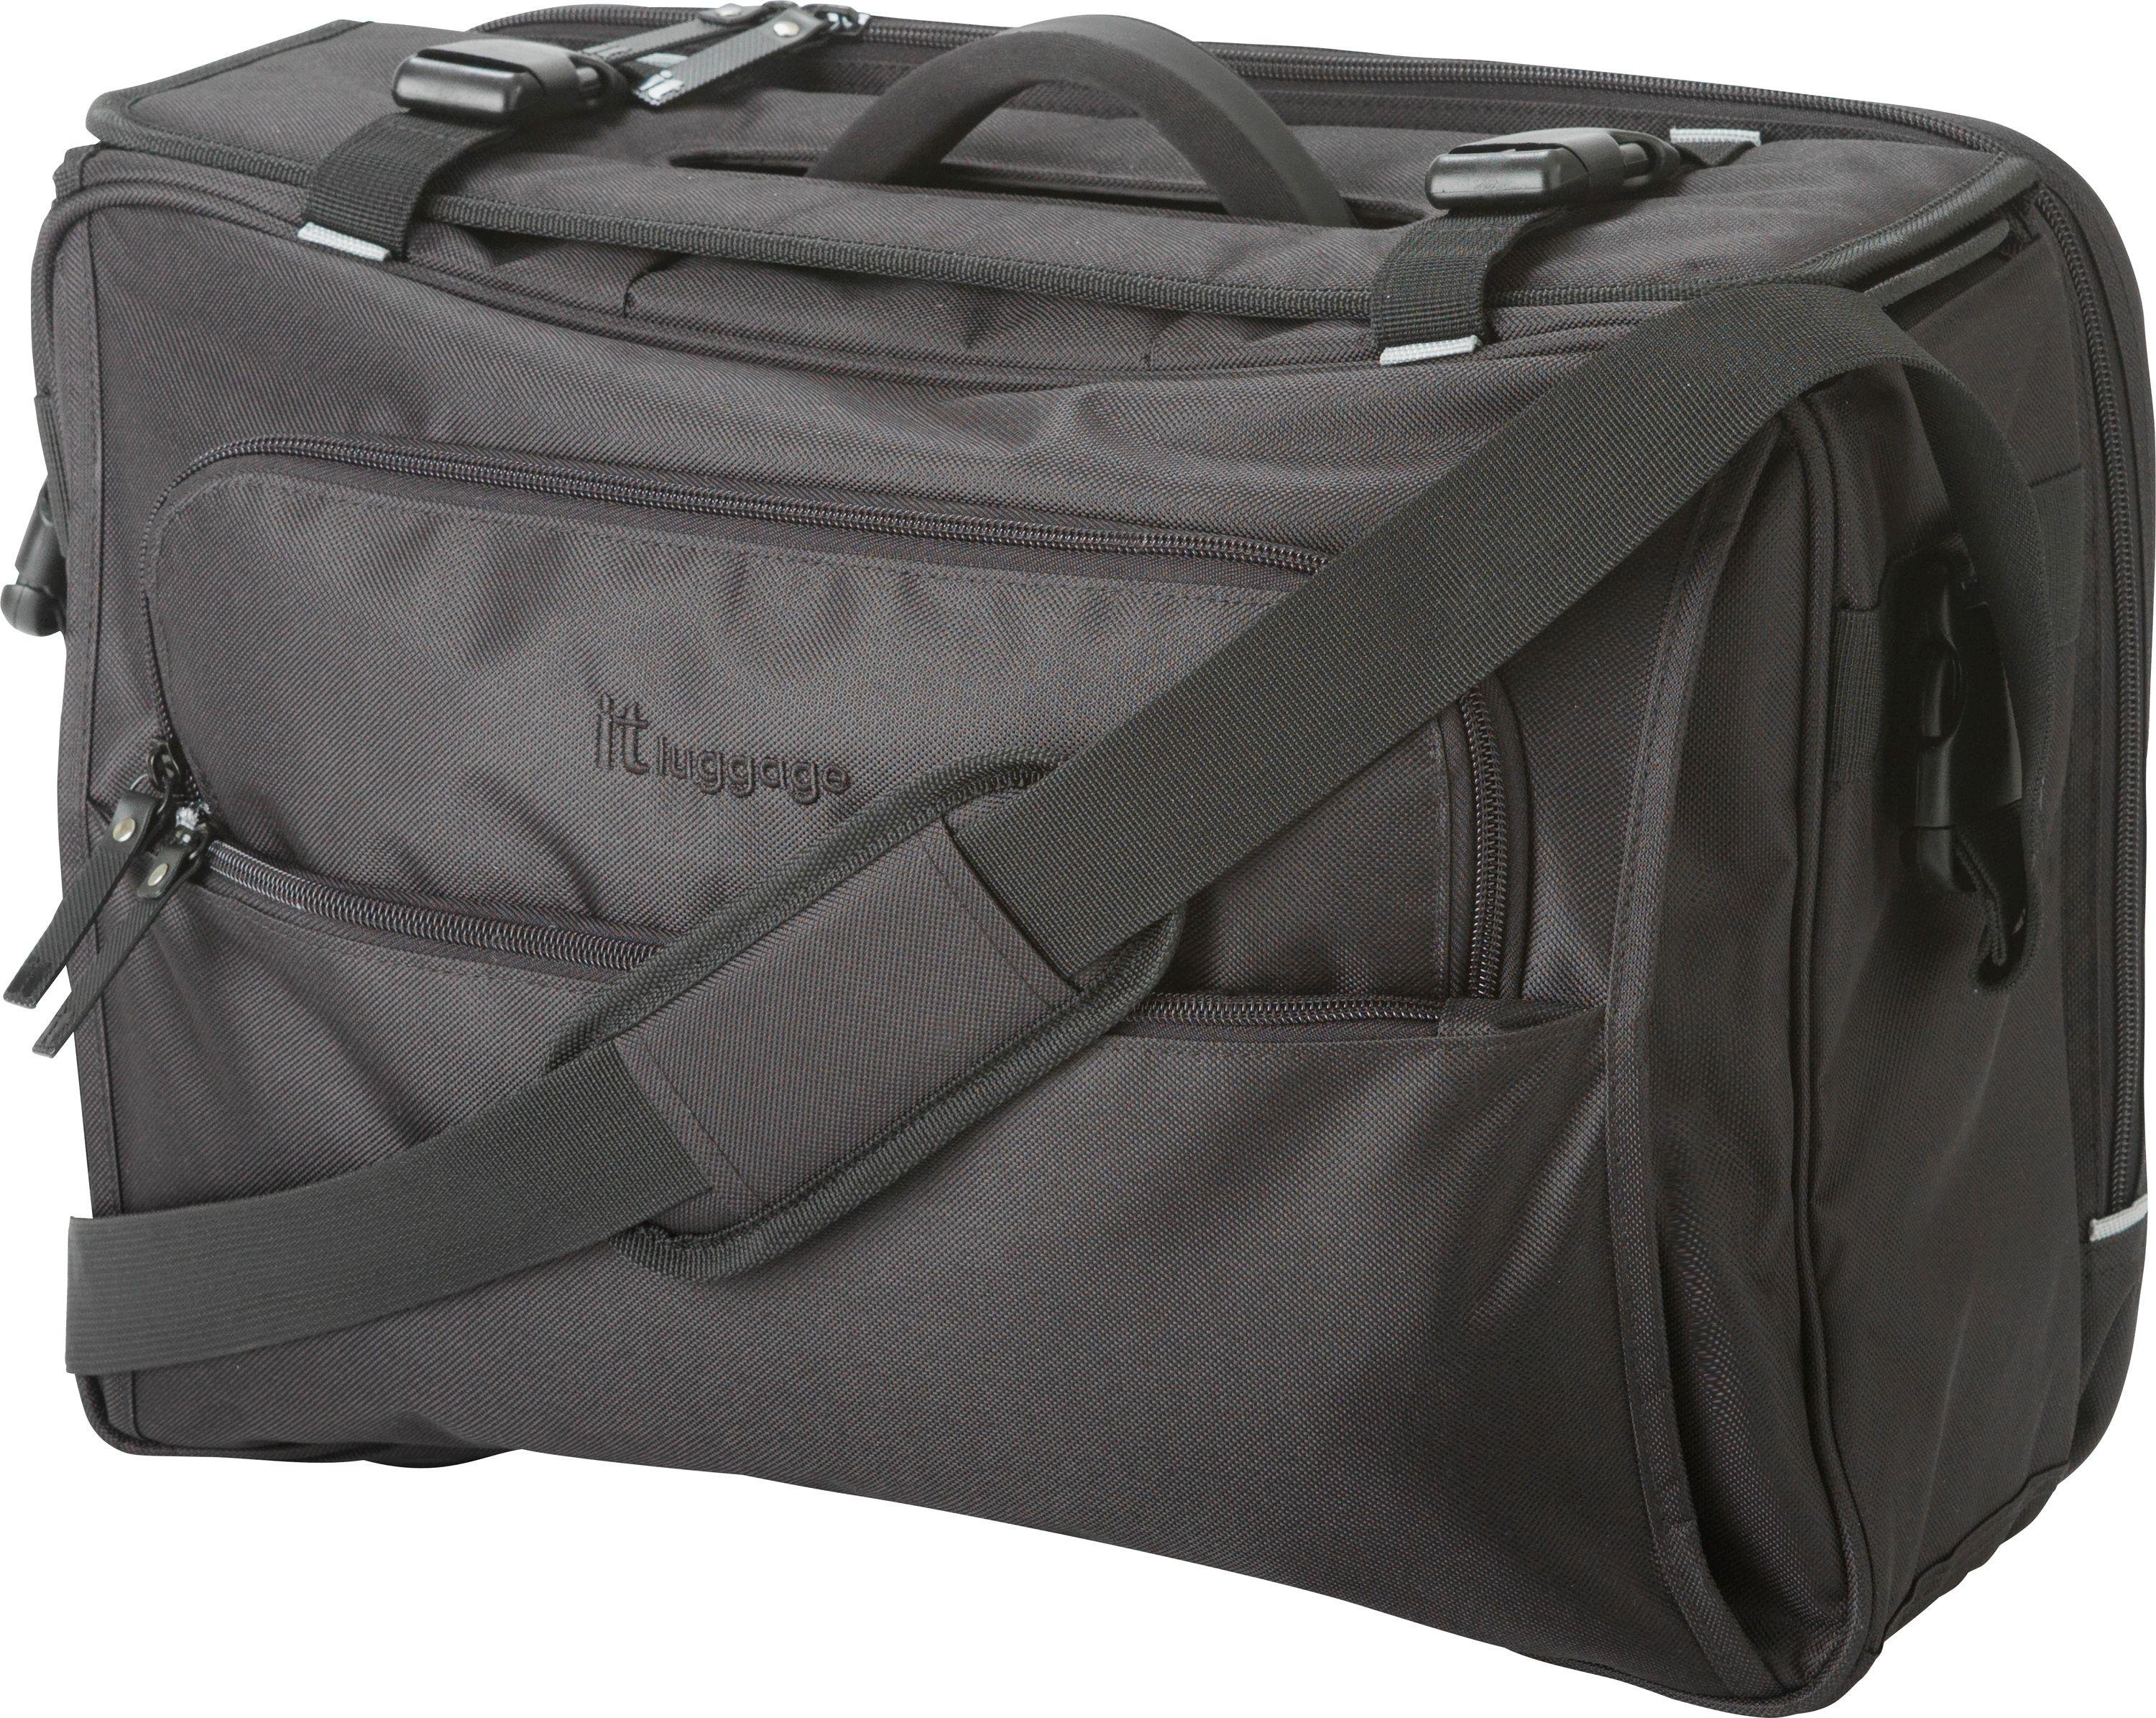 it Luggage Business Shoulder Bag Review